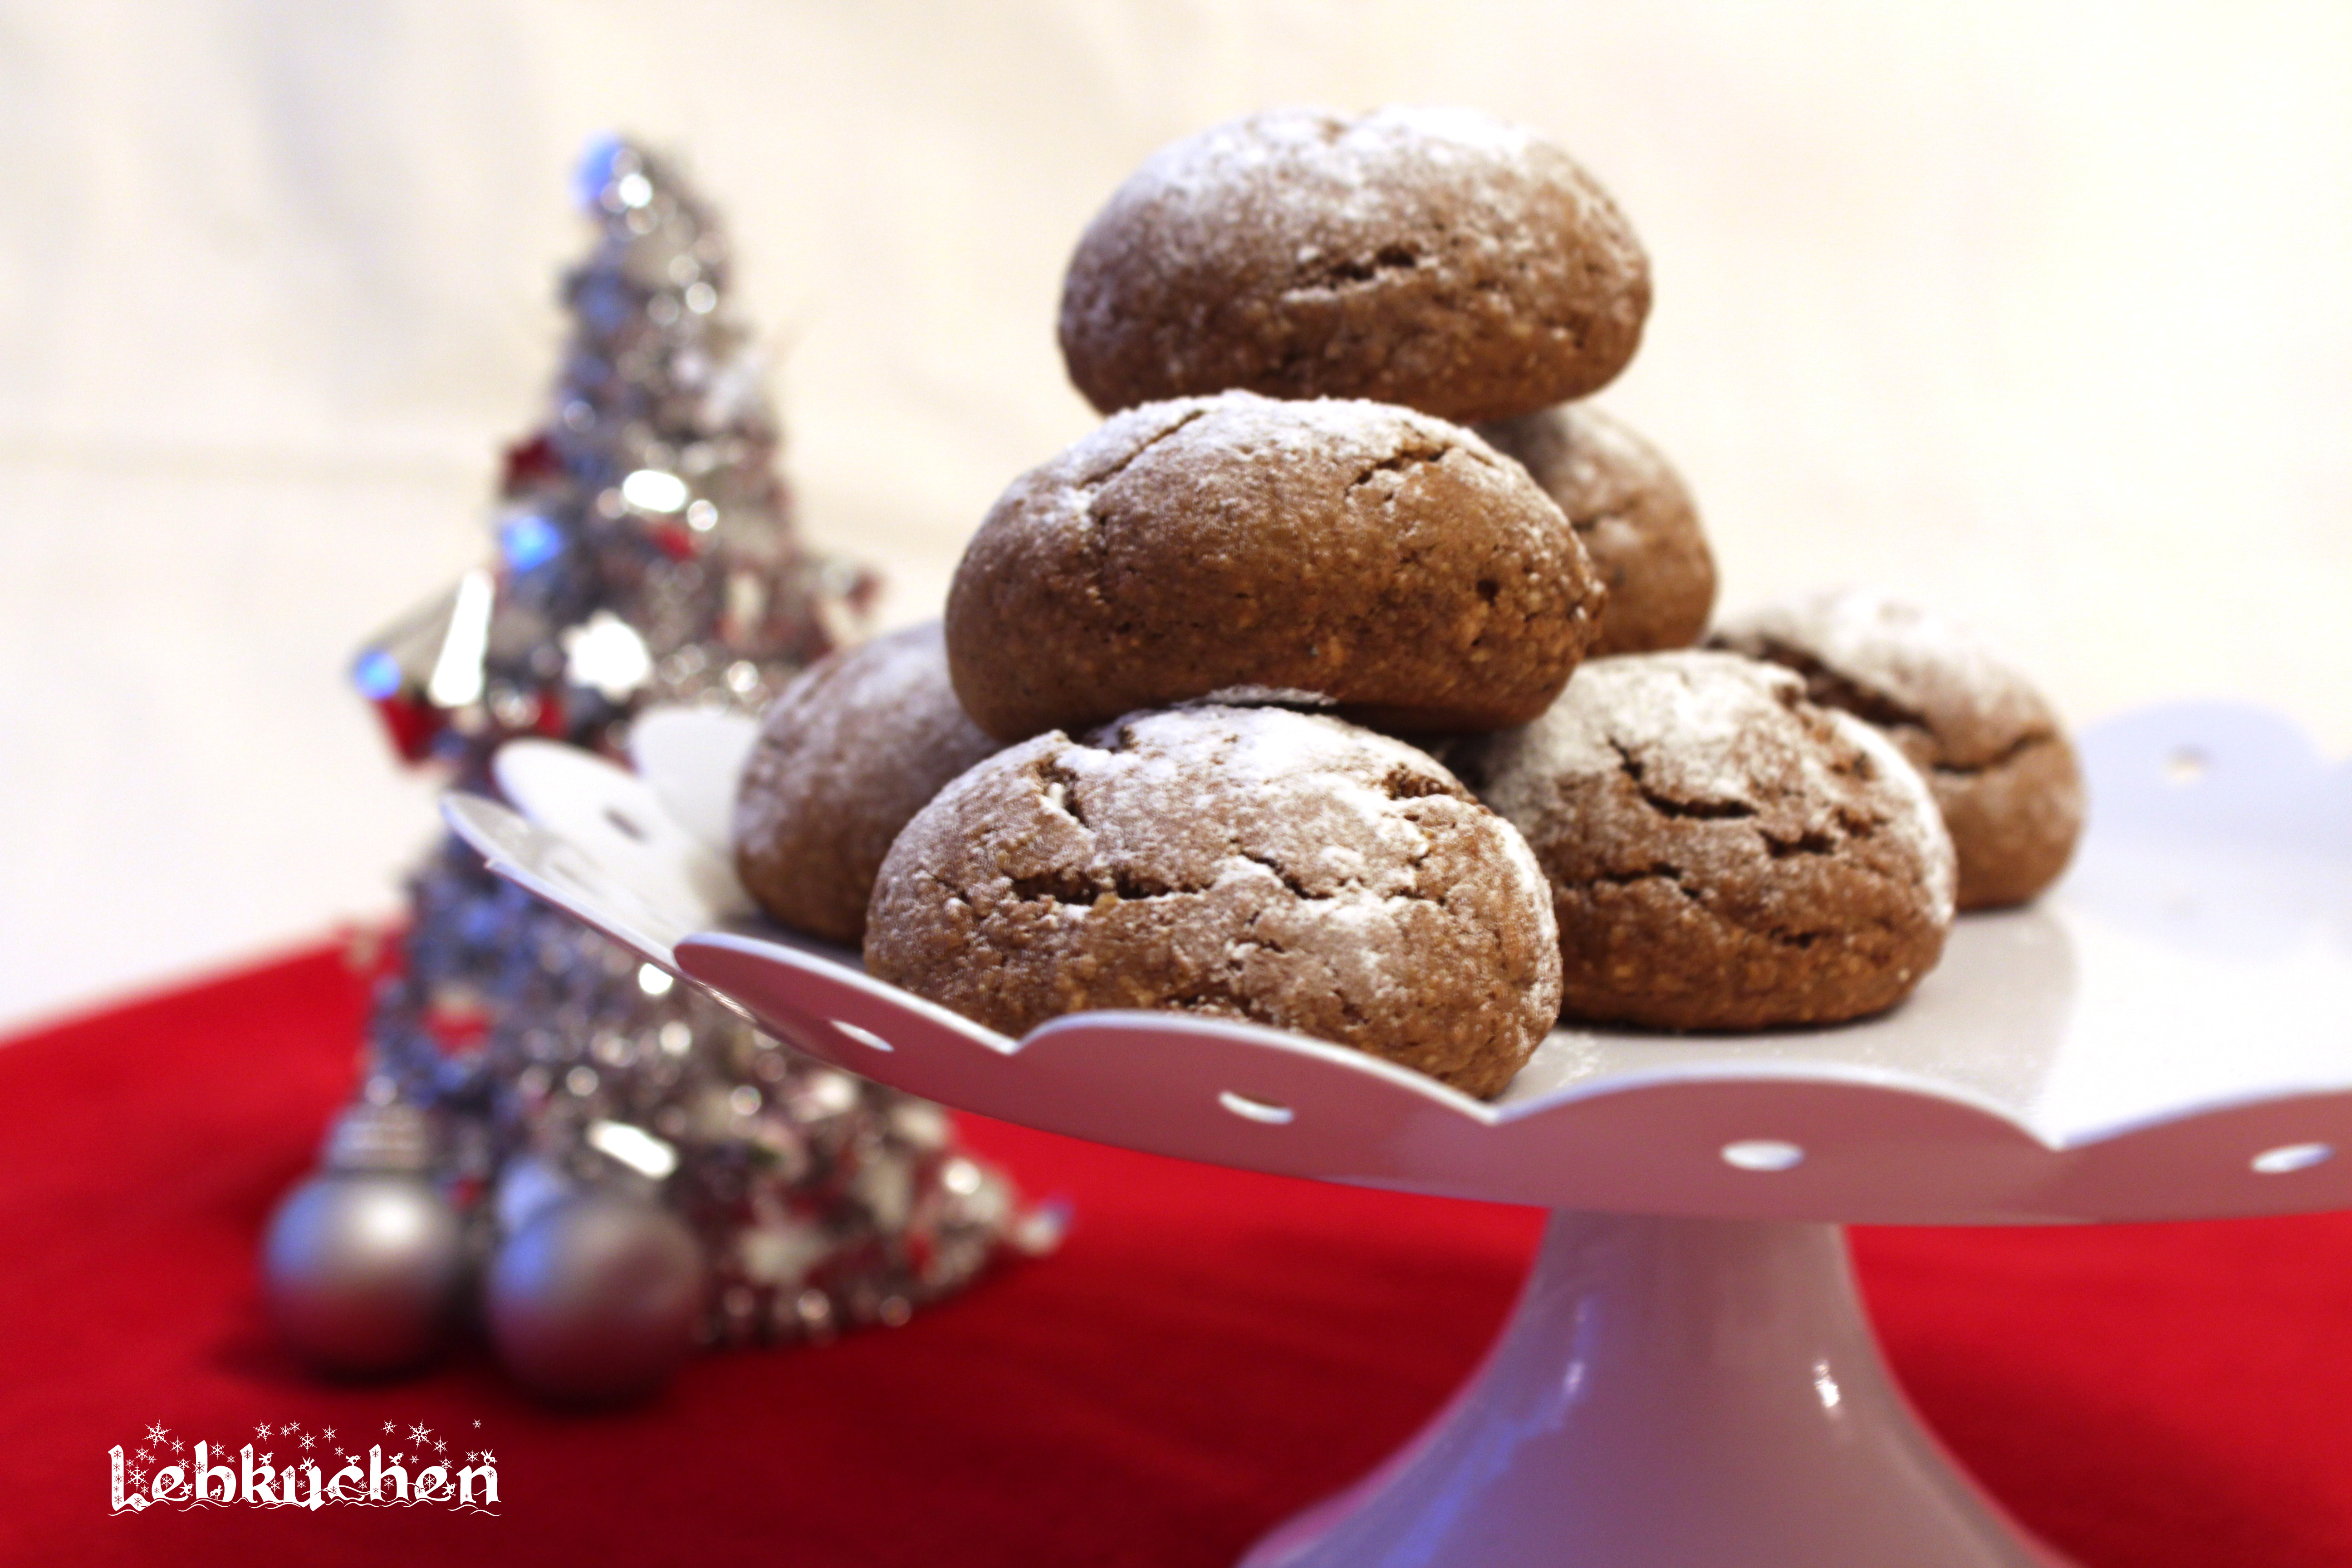 Nice and spiced German Lebkuchen cookies